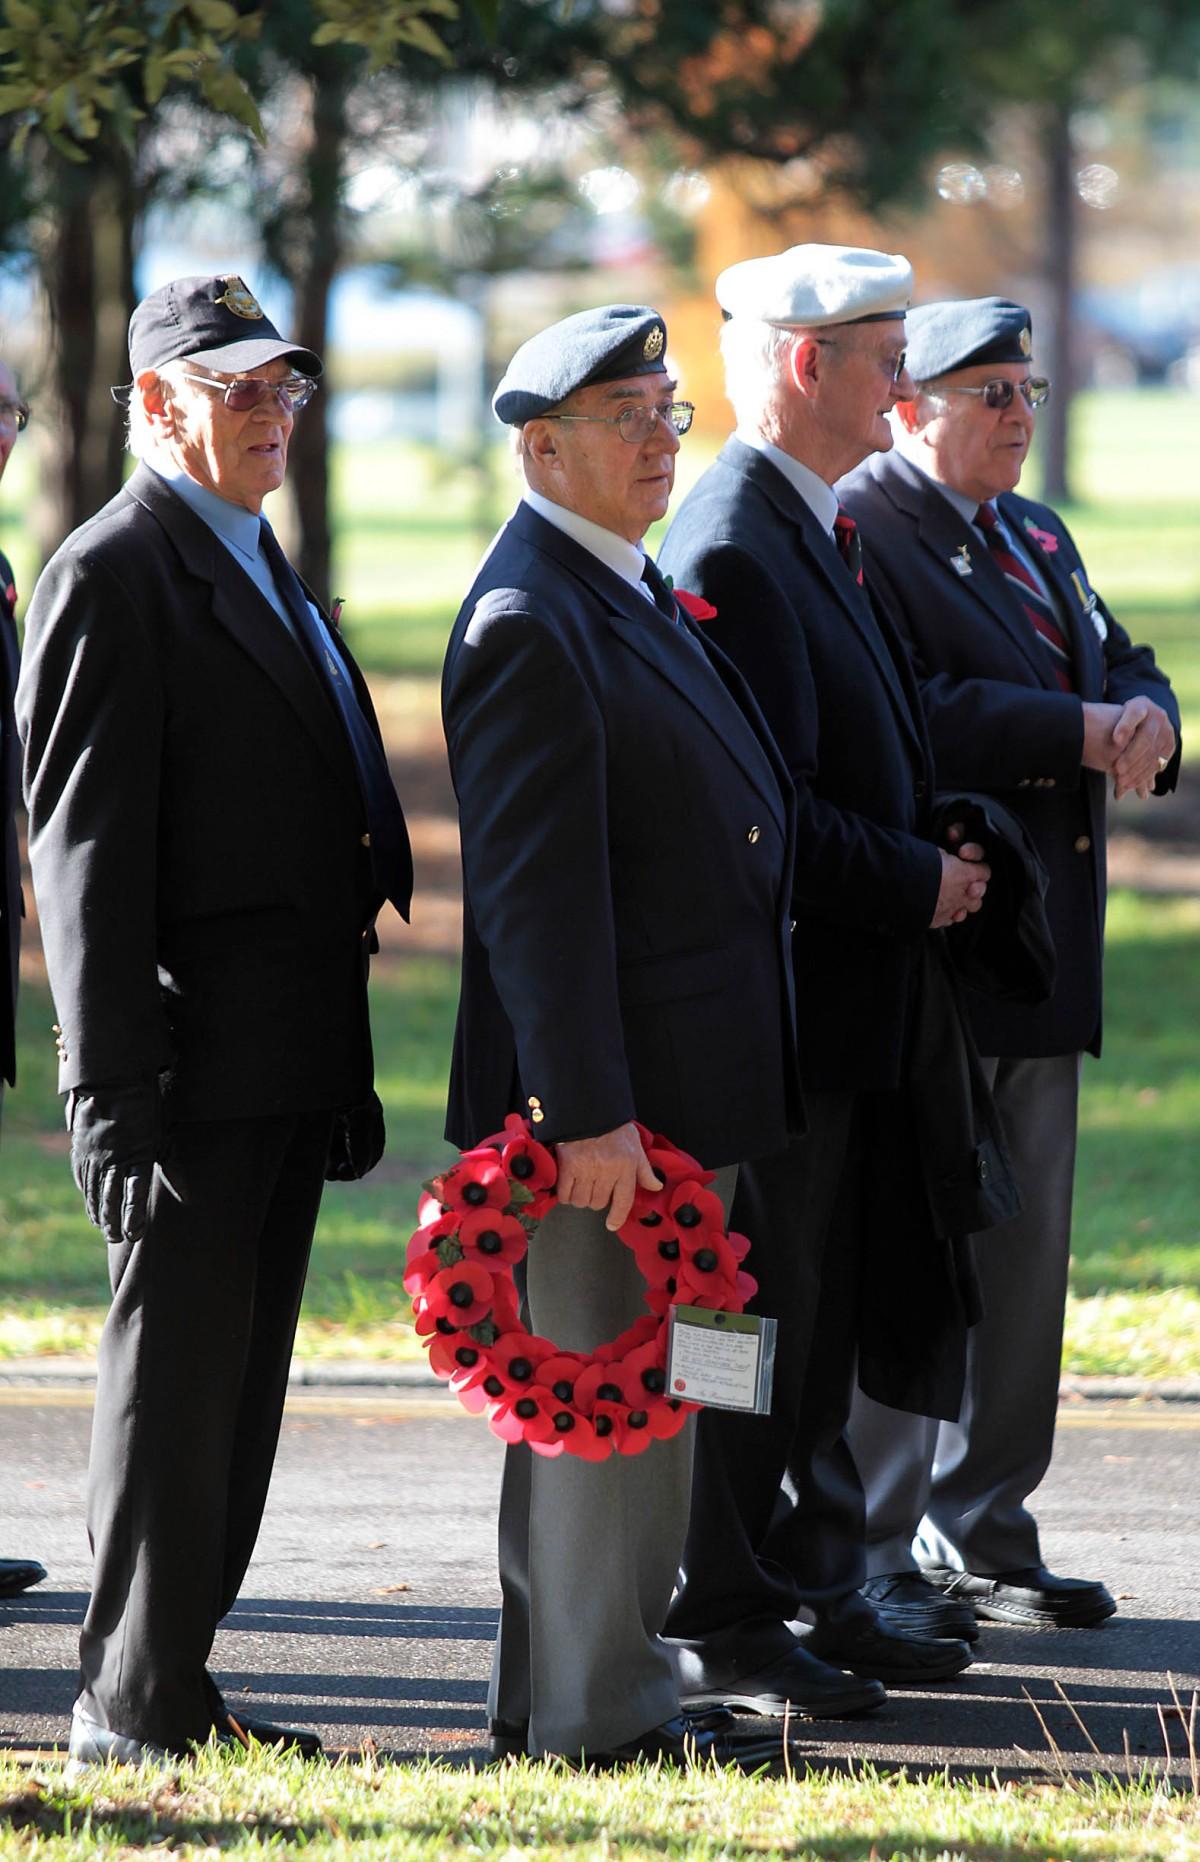 All our pictures of the Remembrance Day service at Poole Park